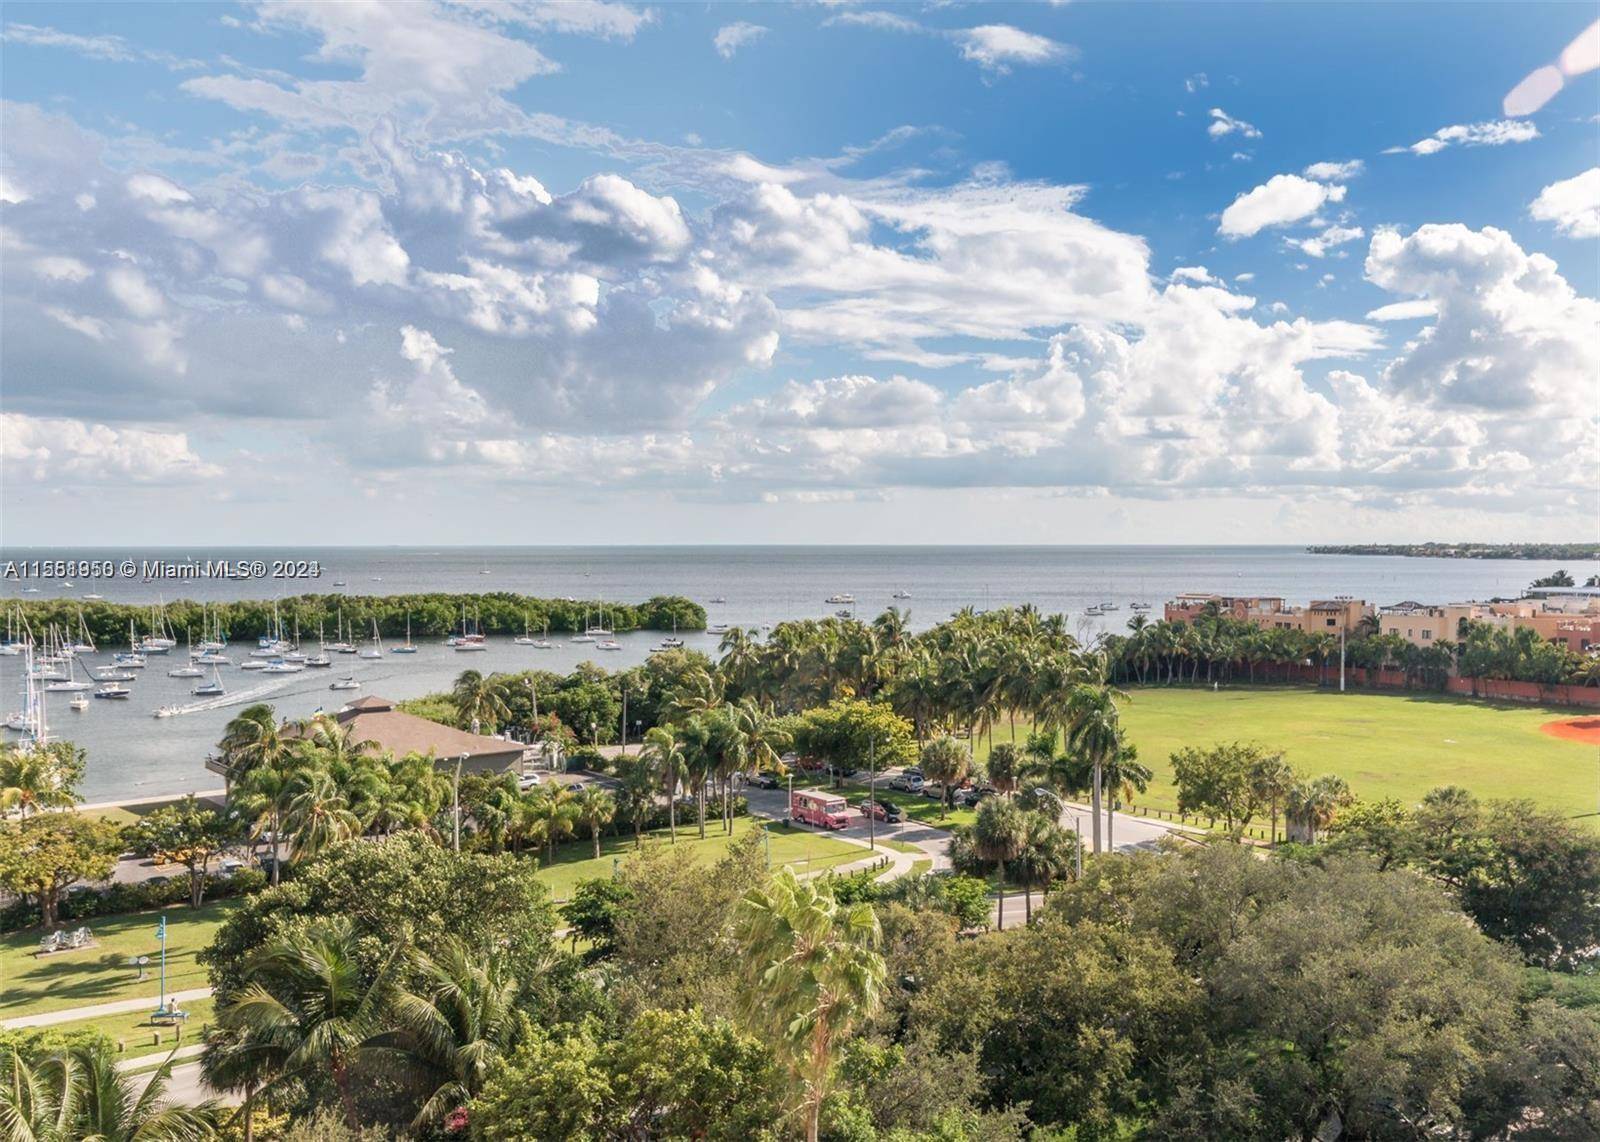 Experience breathtaking water views and the luxurious lifestyle you deserve with this magnificent 2 bedroom, 2 bath fully furnished turnkey condo in the heart of Coconut Grove.